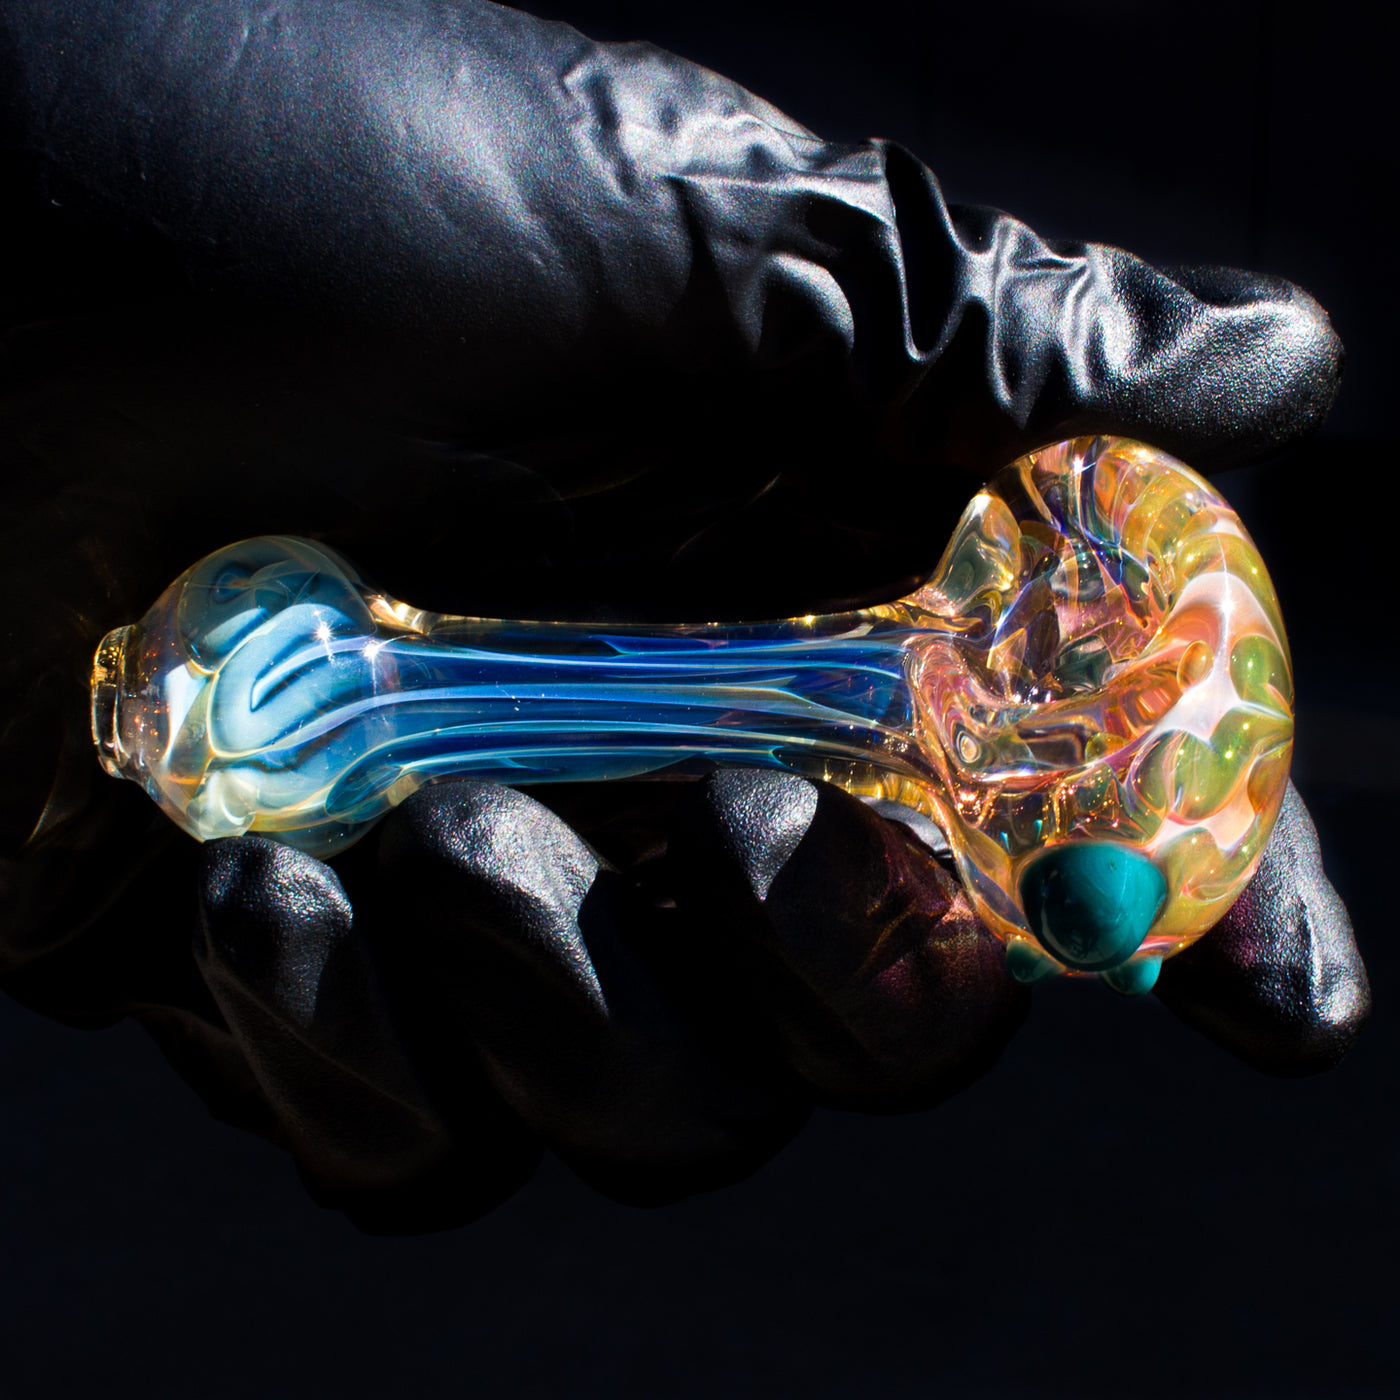 Glass Pipe - Hammer, Gold And Silver Fuming, 5.0 • American Made